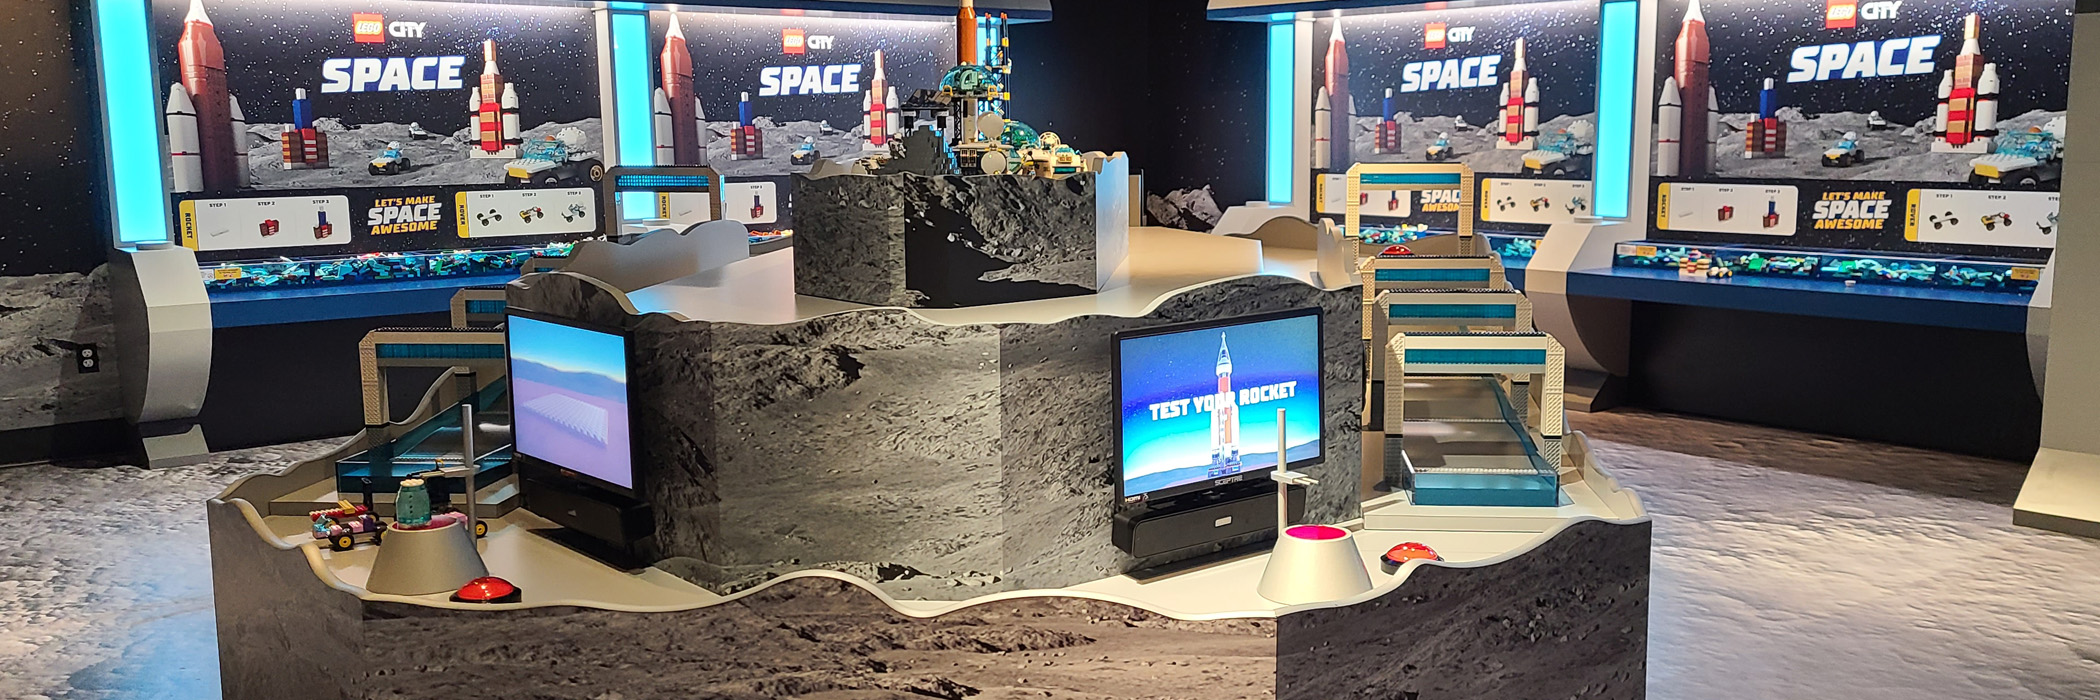 Blast Off at the LEGO CITY Space attraction